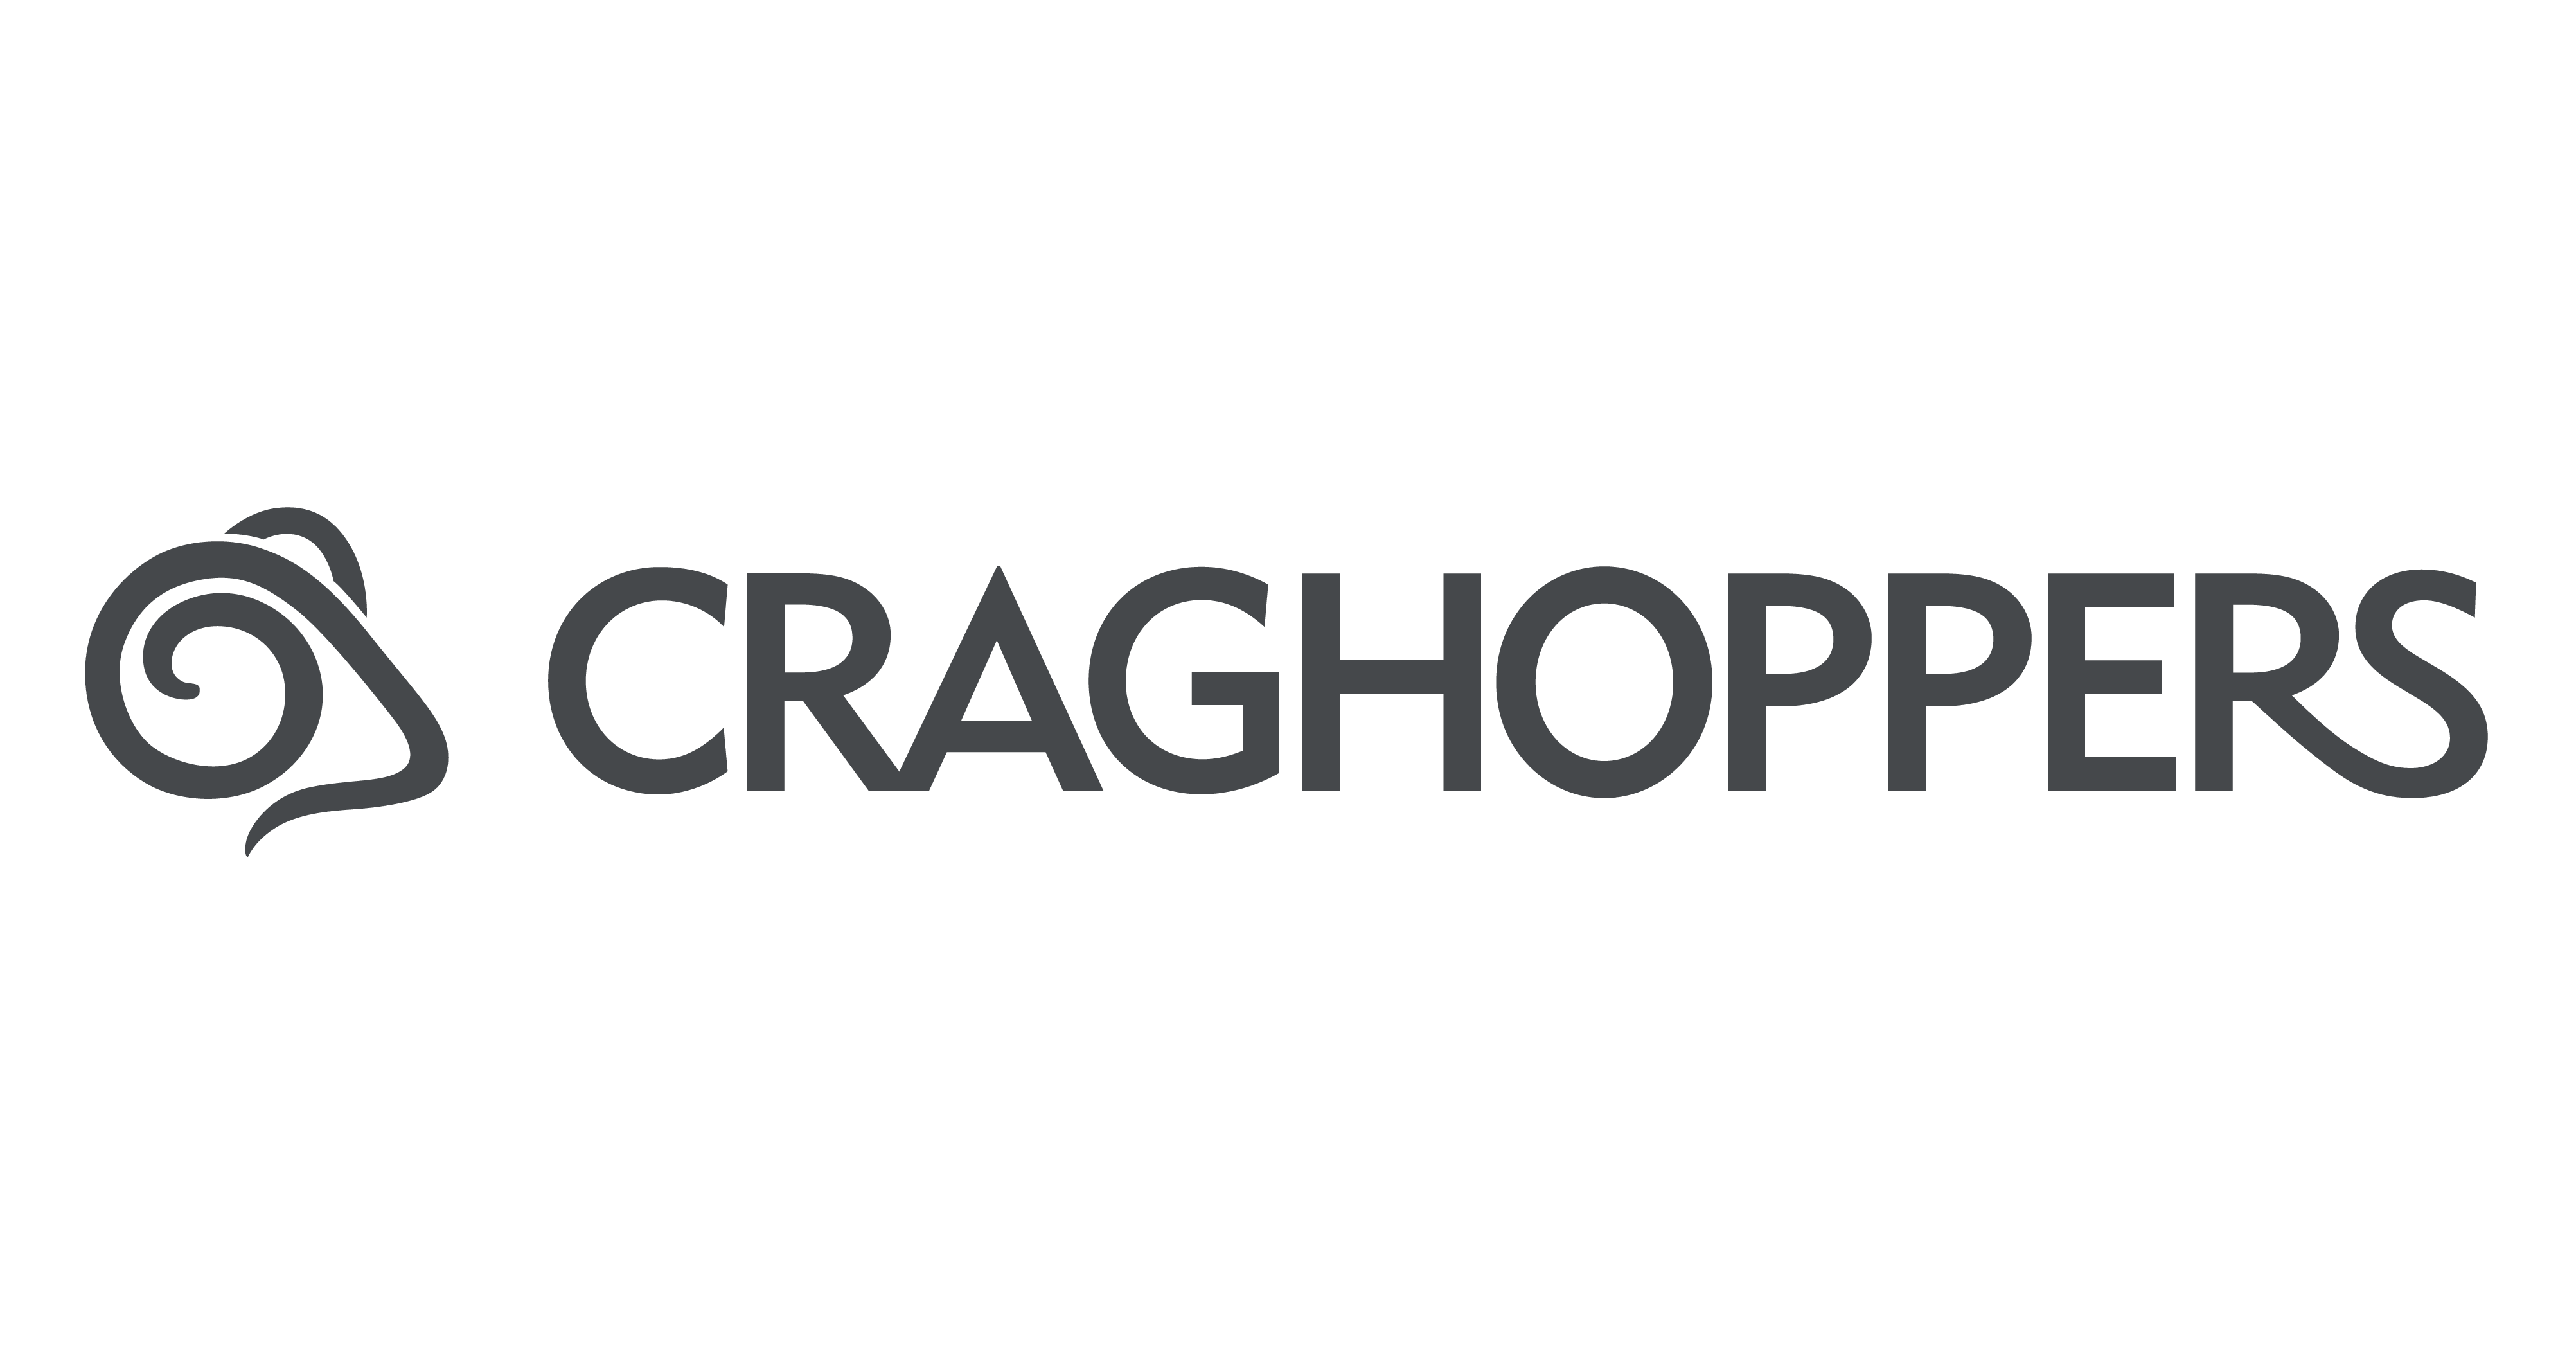 CRAGHOPPERS